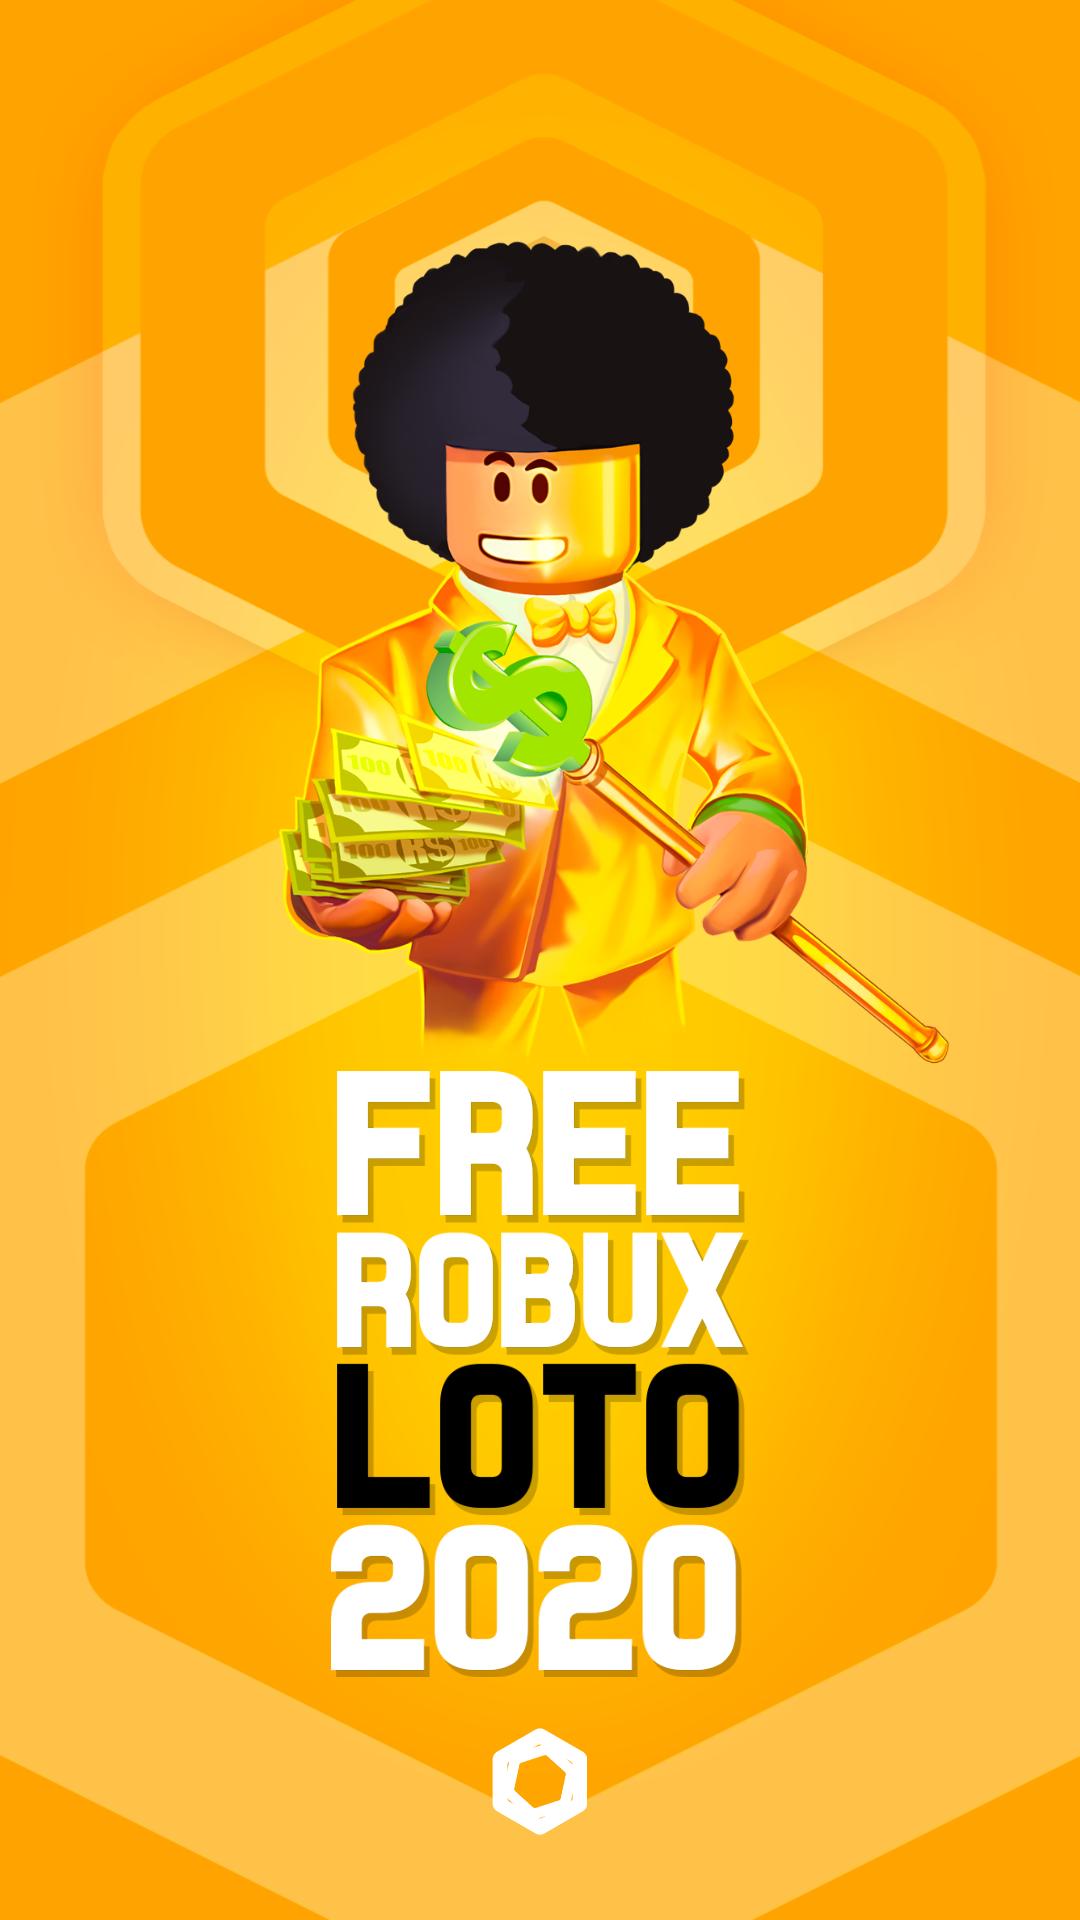 Free Robux Loto 2020 For Android Apk Download - free robux crawler mod apk unlimited gems